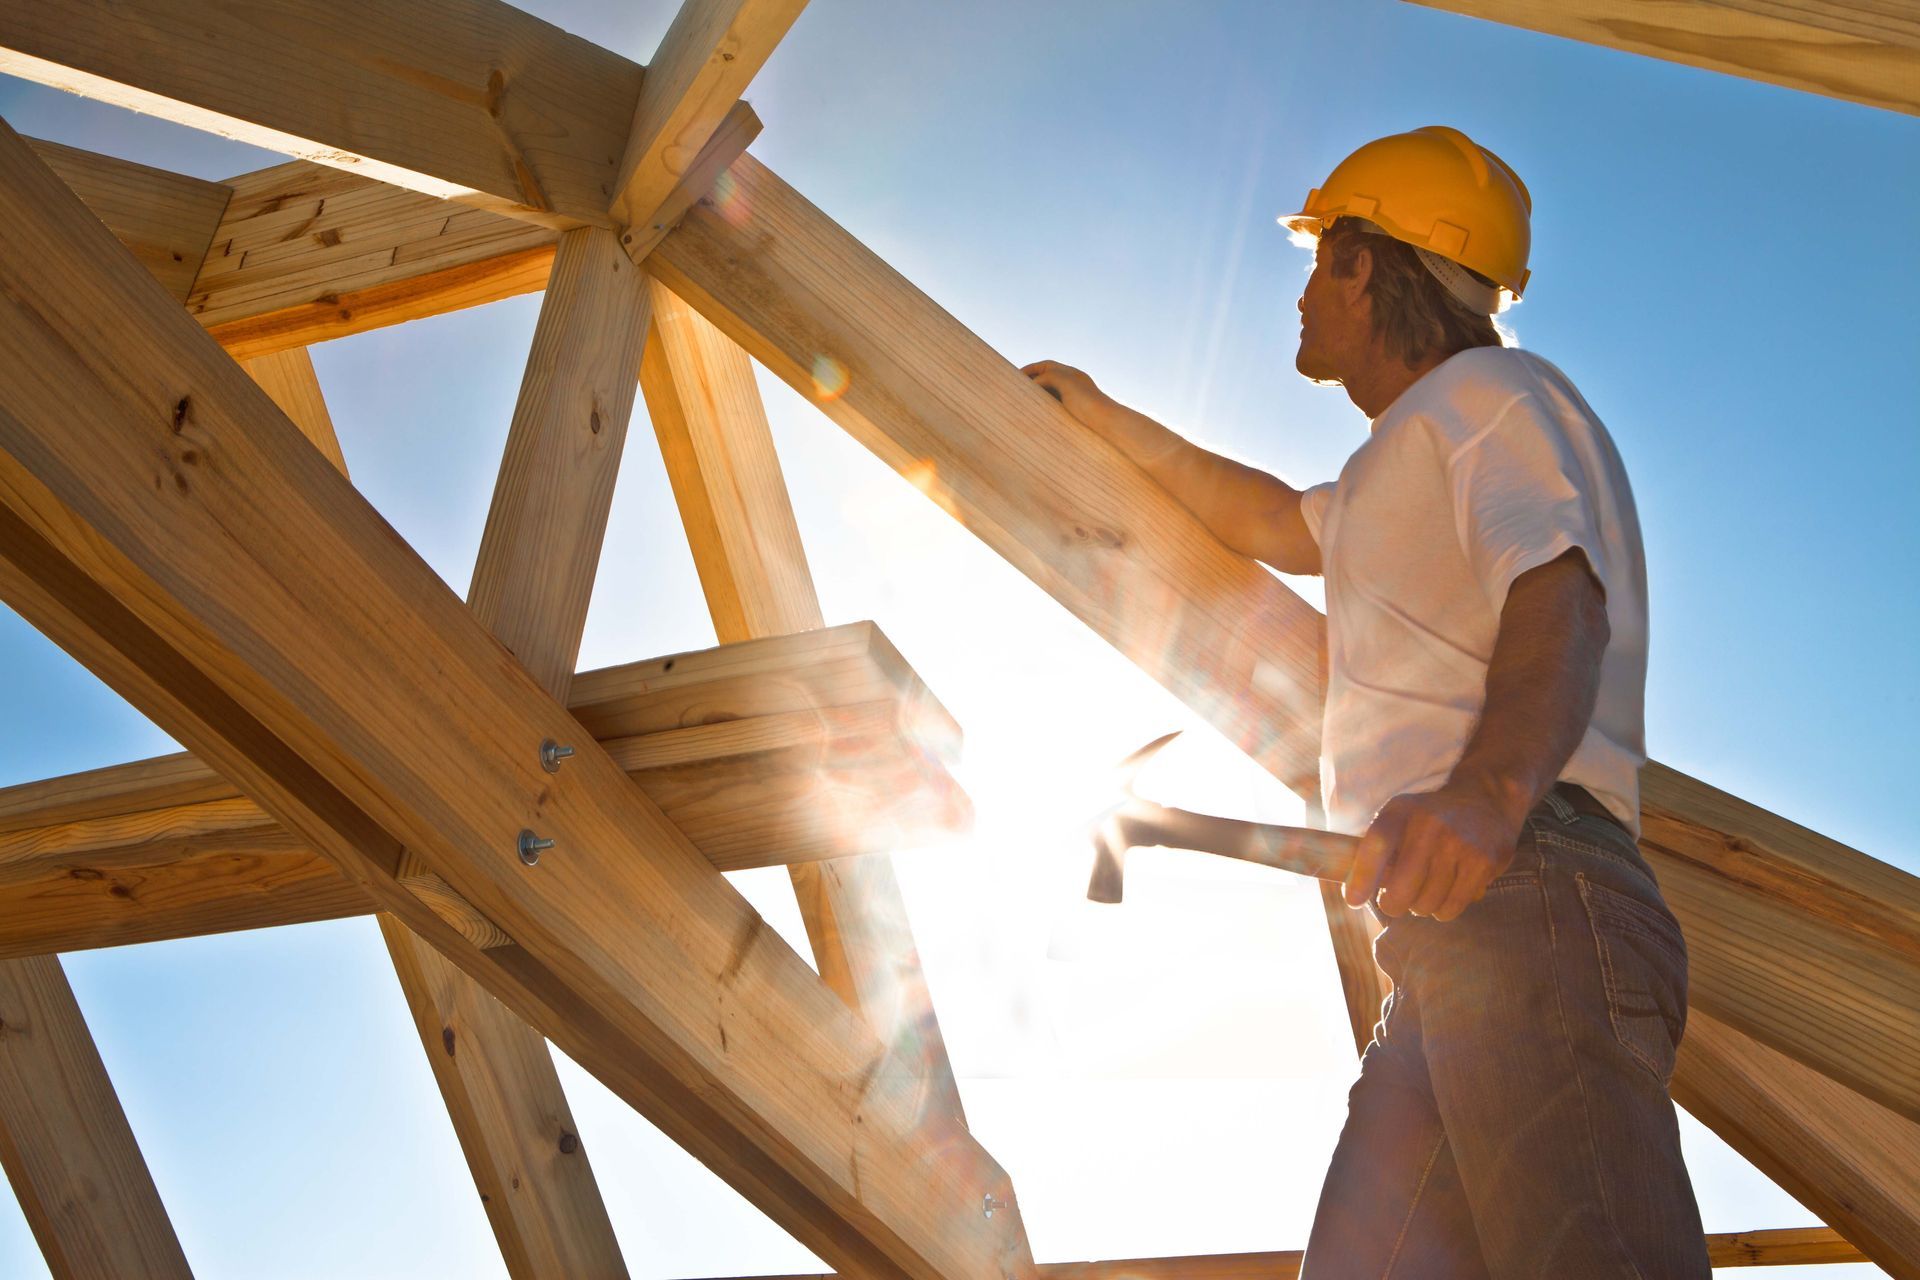 A man wearing a hard hat is working on a wooden structure